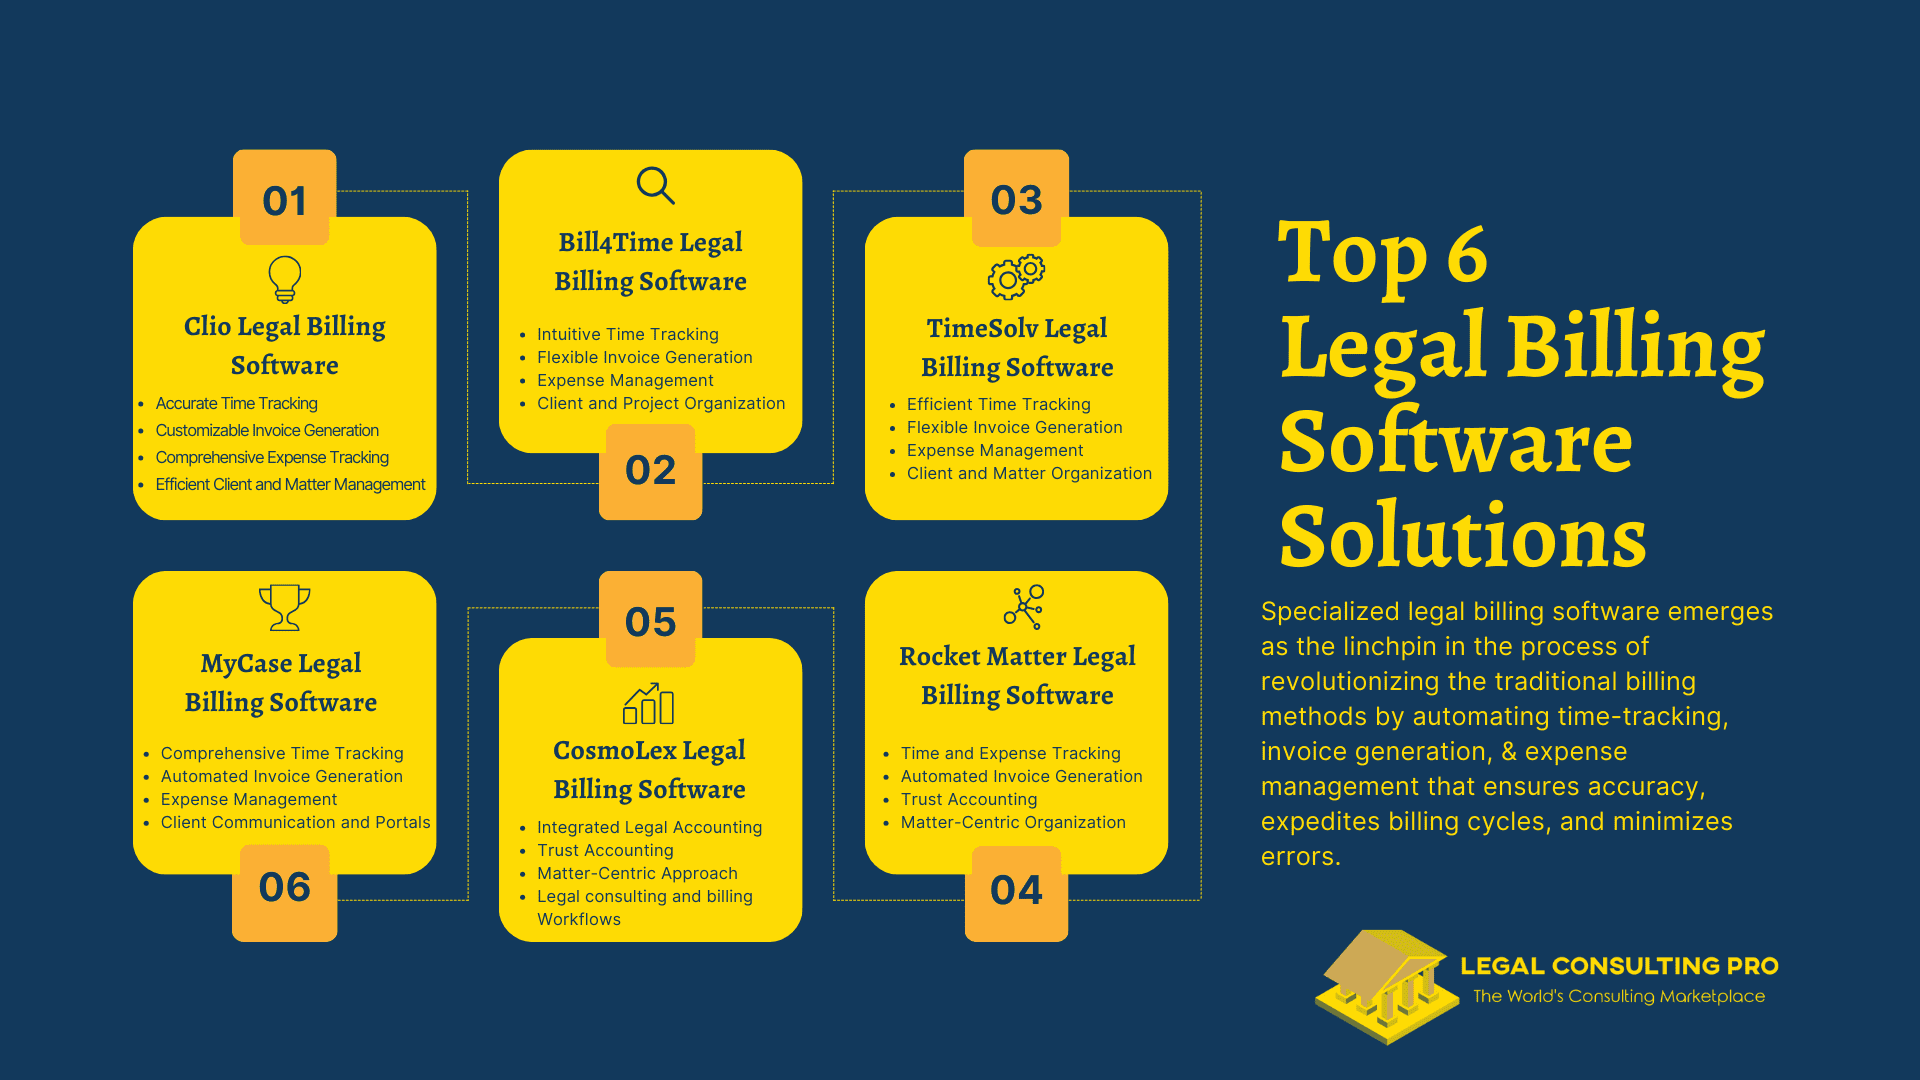 Top 6 Legal Billing Software Solutions Infographic